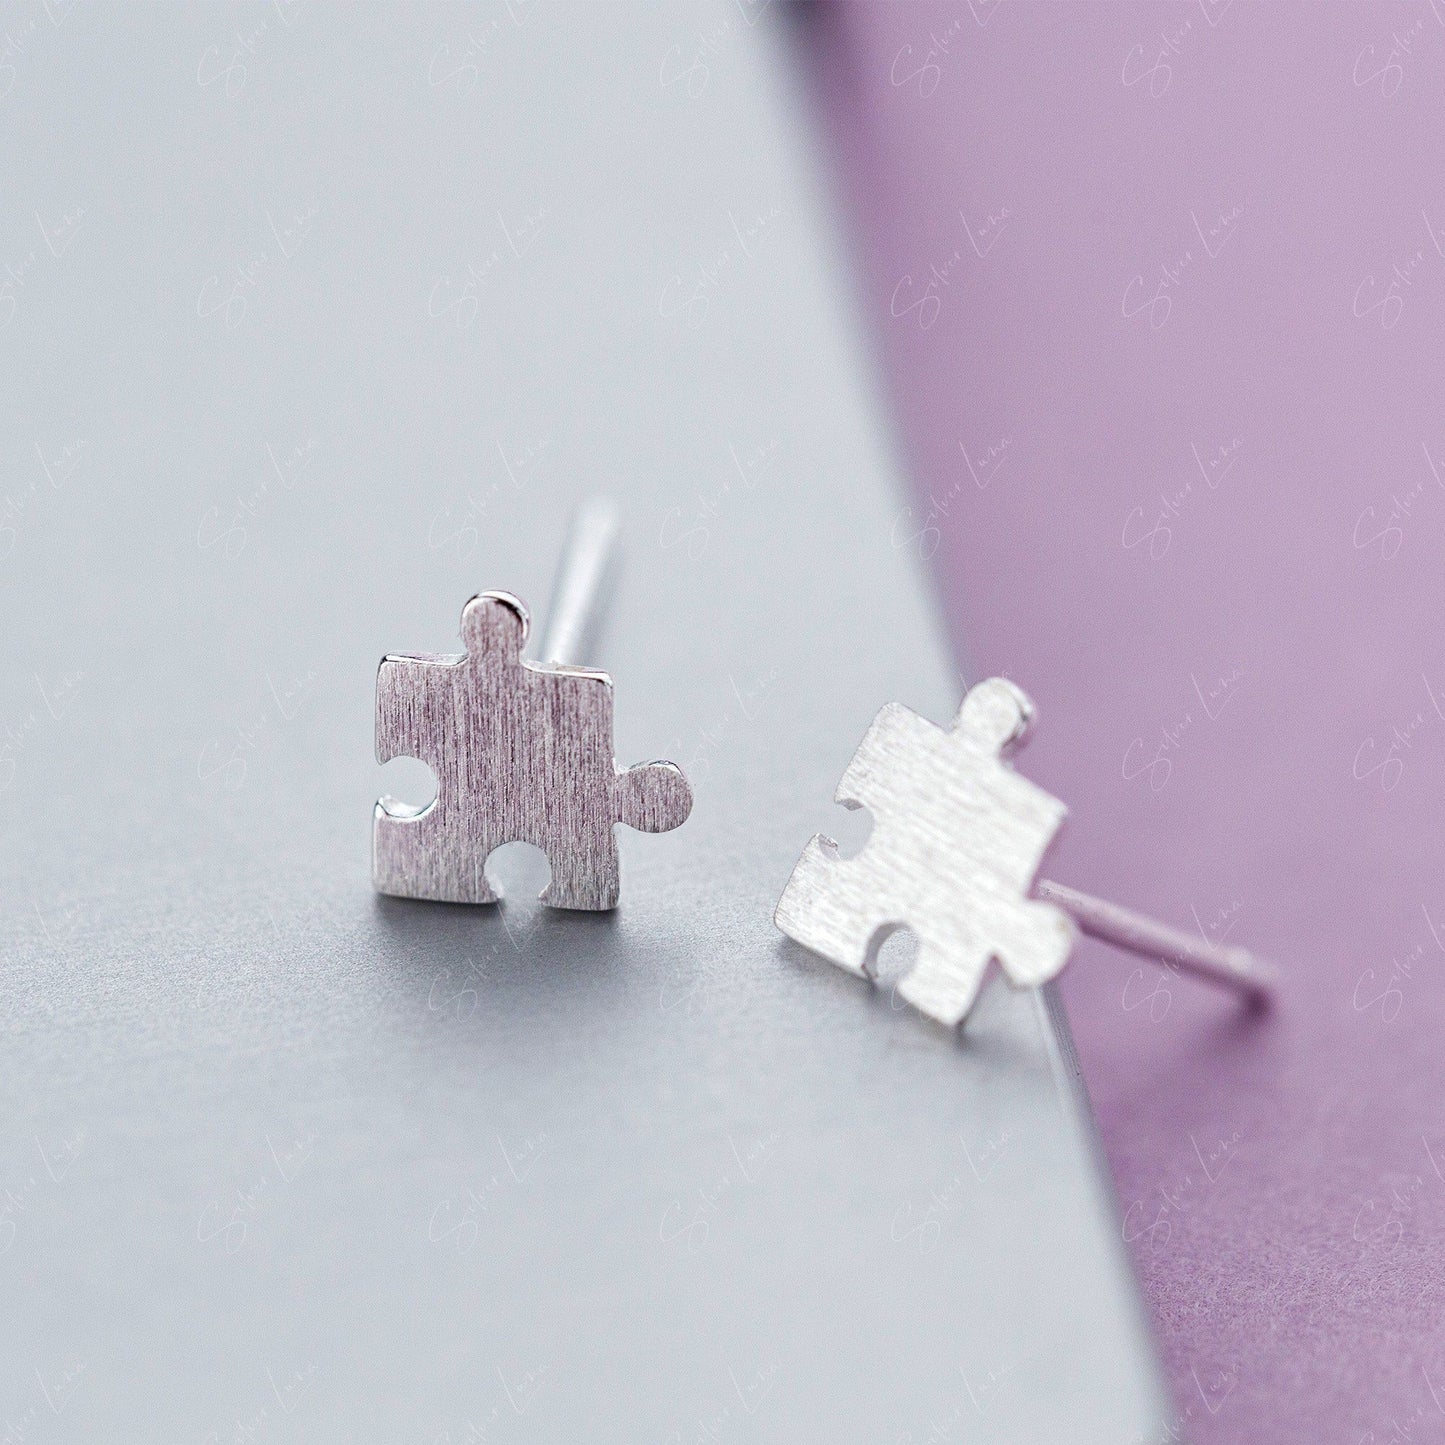 Tiny Puzzle piece Stud Earrings